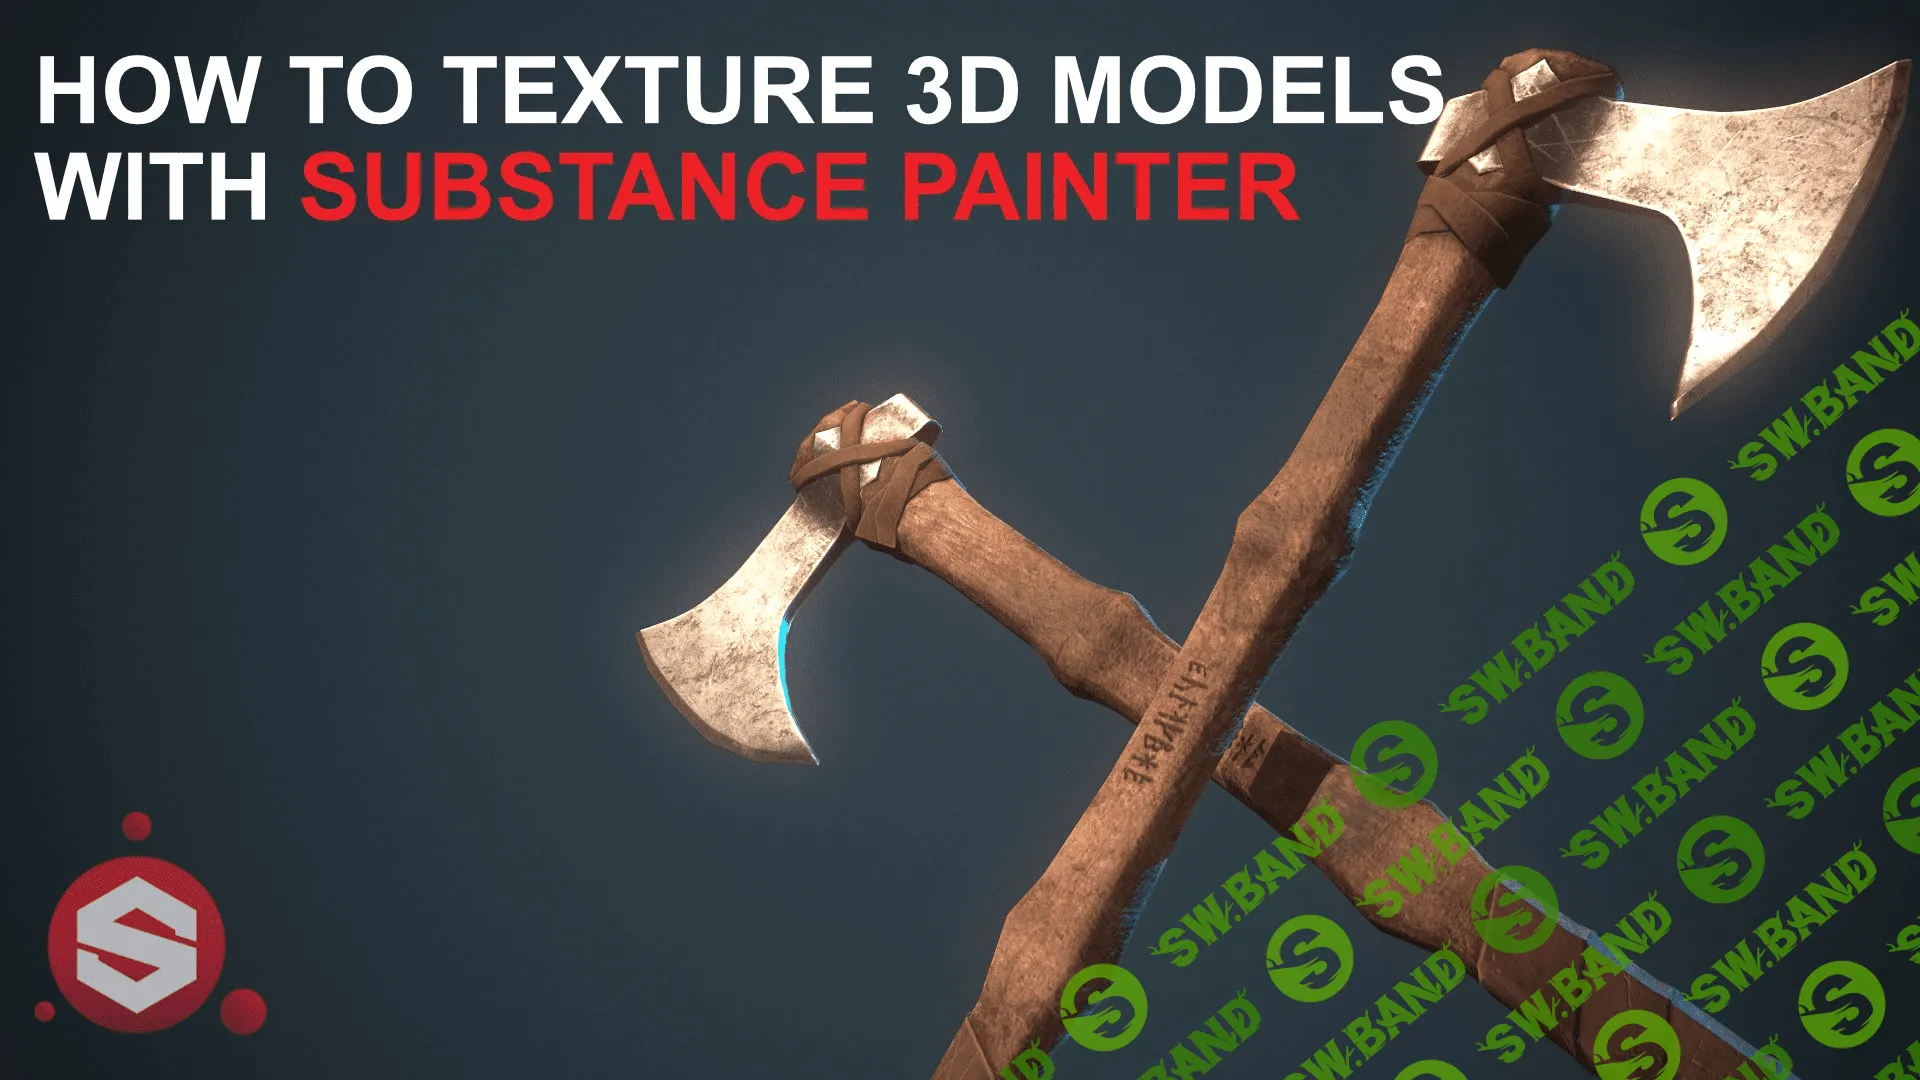 [Skillshare] Tom Hanssens - How To Texture 3D Models With Substance Painter